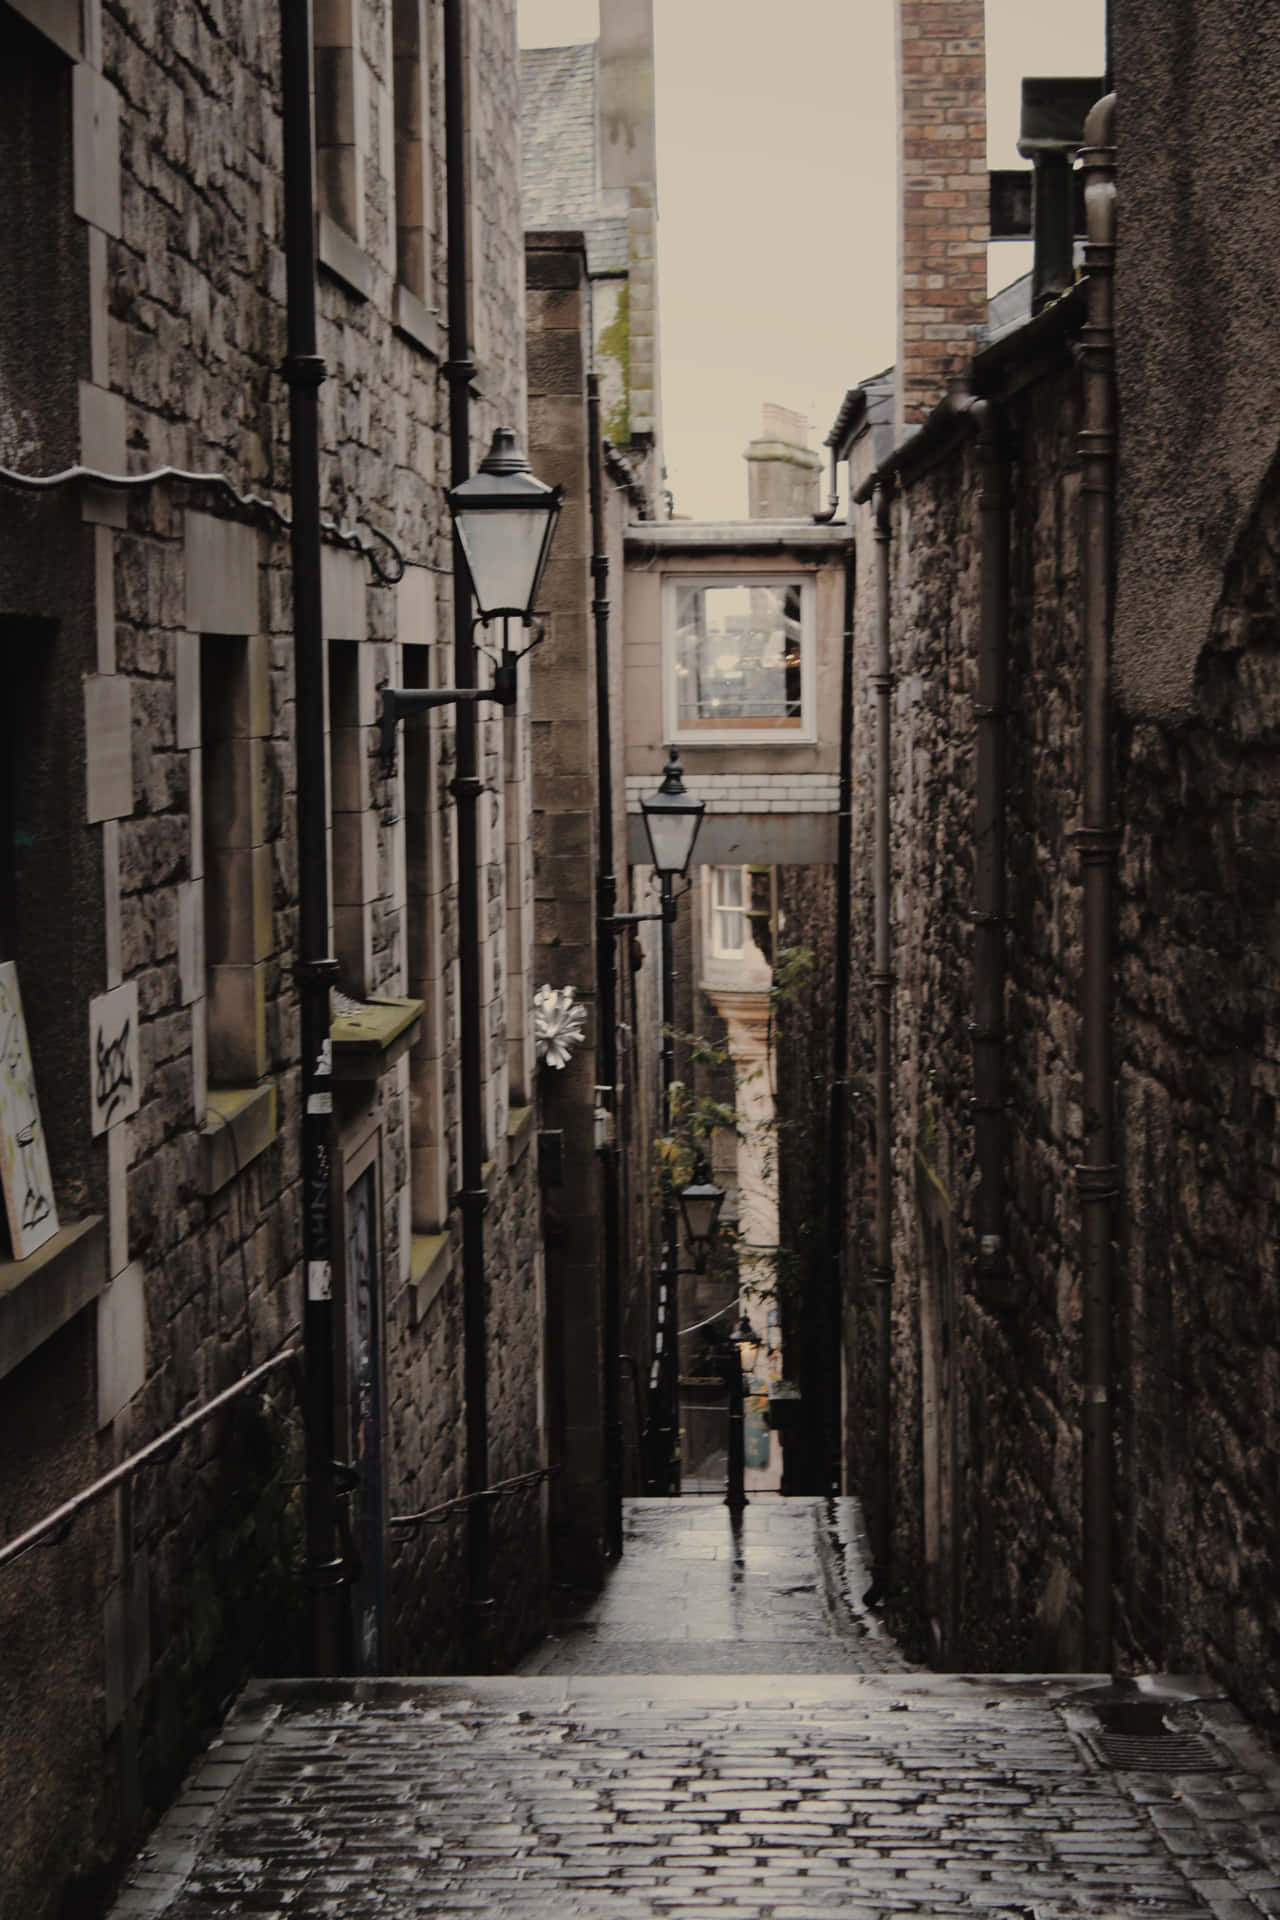 Explore the Narrow, Stormy Alleyways of the City